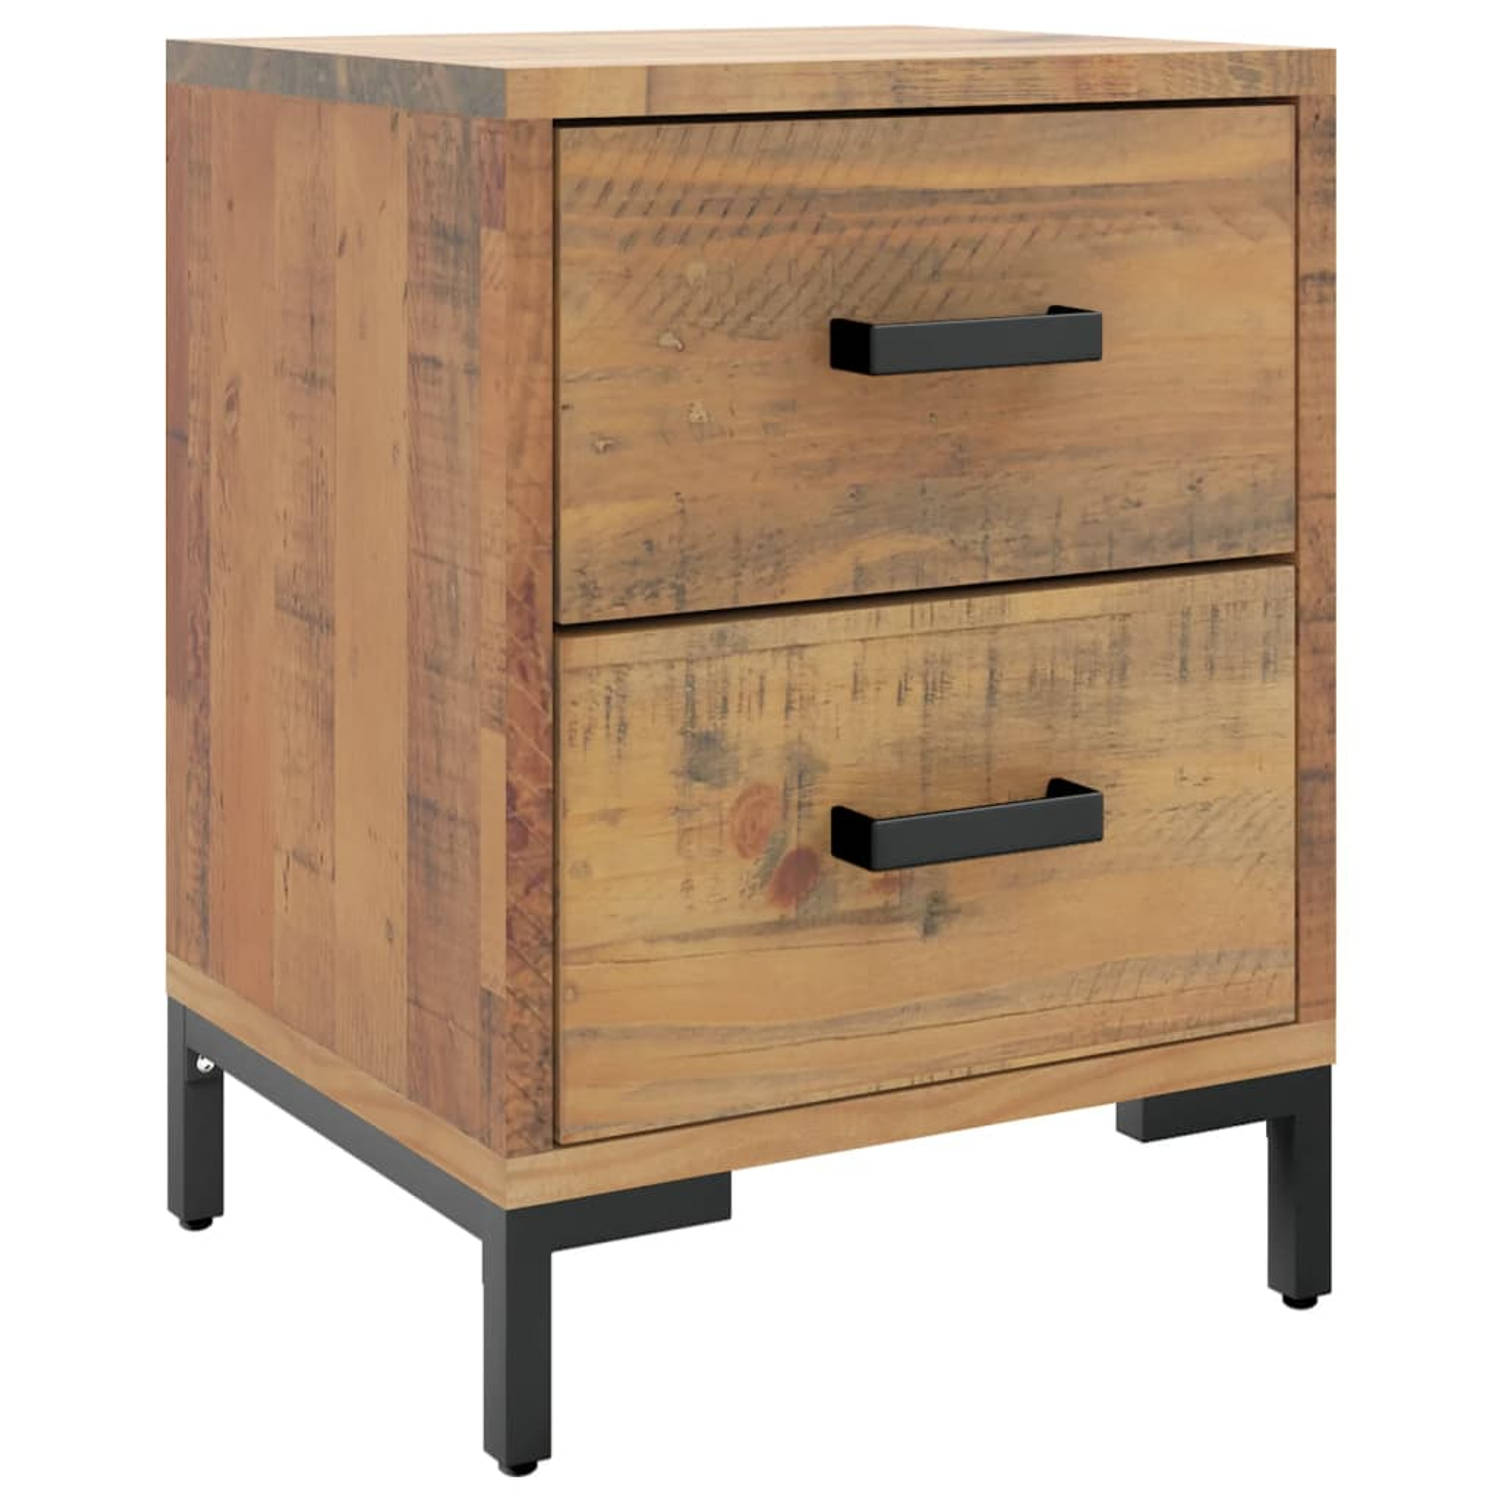 The Living Store Nachtkastje 36x30x45 cm gerecycled massief grenenhout bruin - Kast